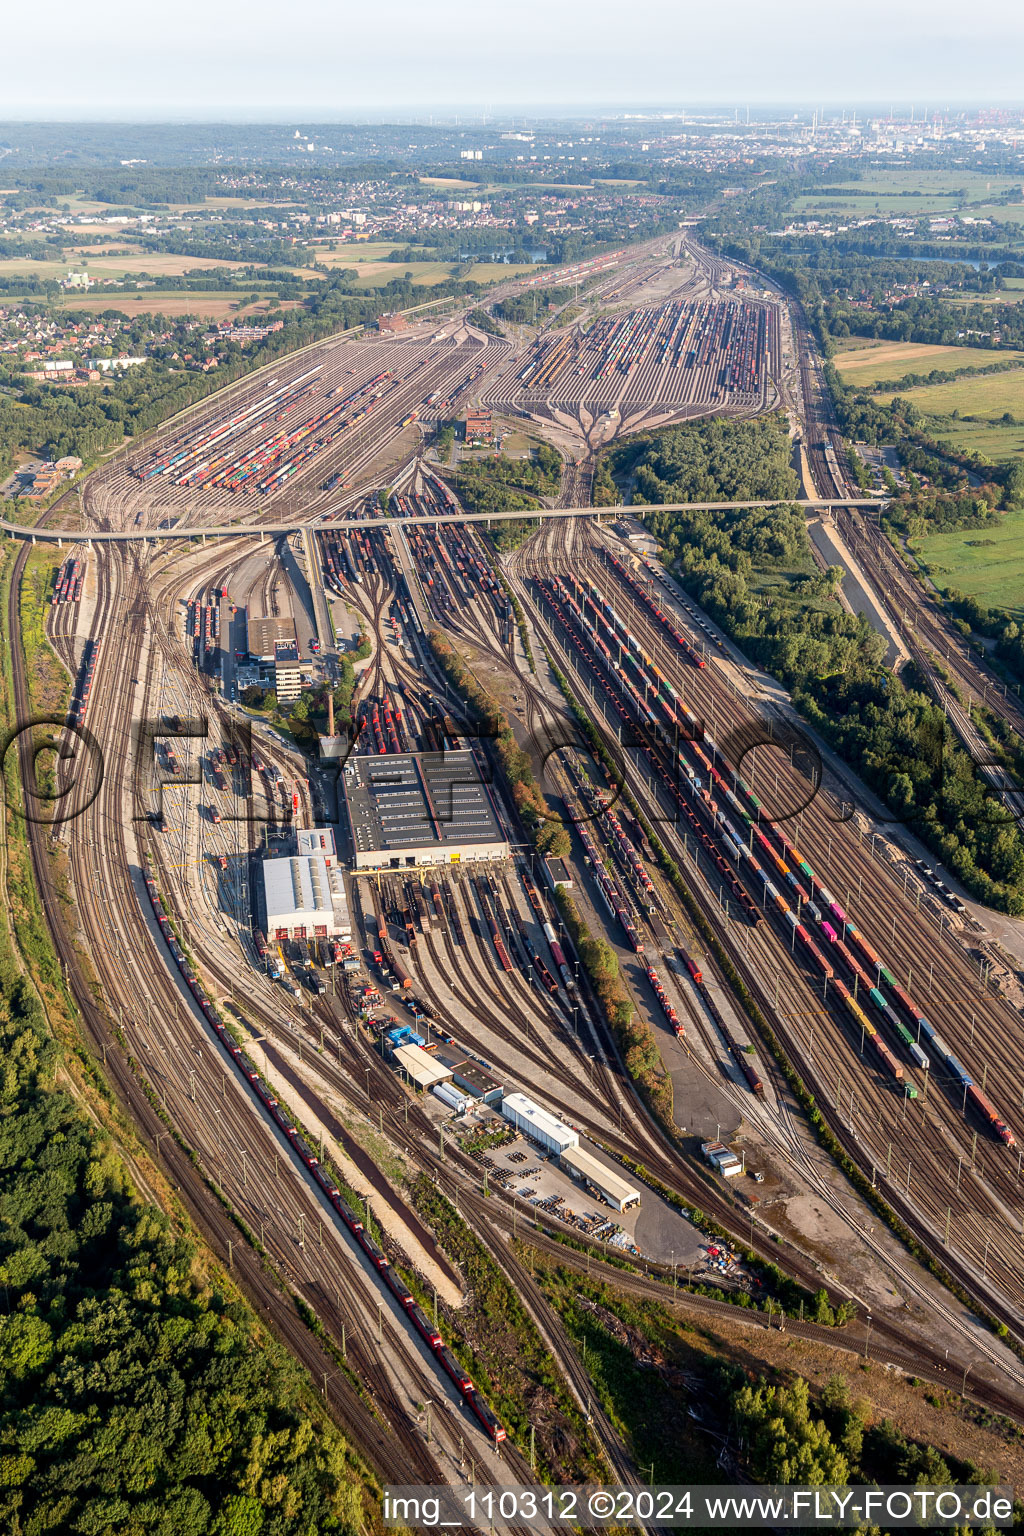 Aerial view of Marshalling yard and freight station Maschen of the Deutsche Bahn in the district Maschen in Seevetal in the state Lower Saxony, Germany